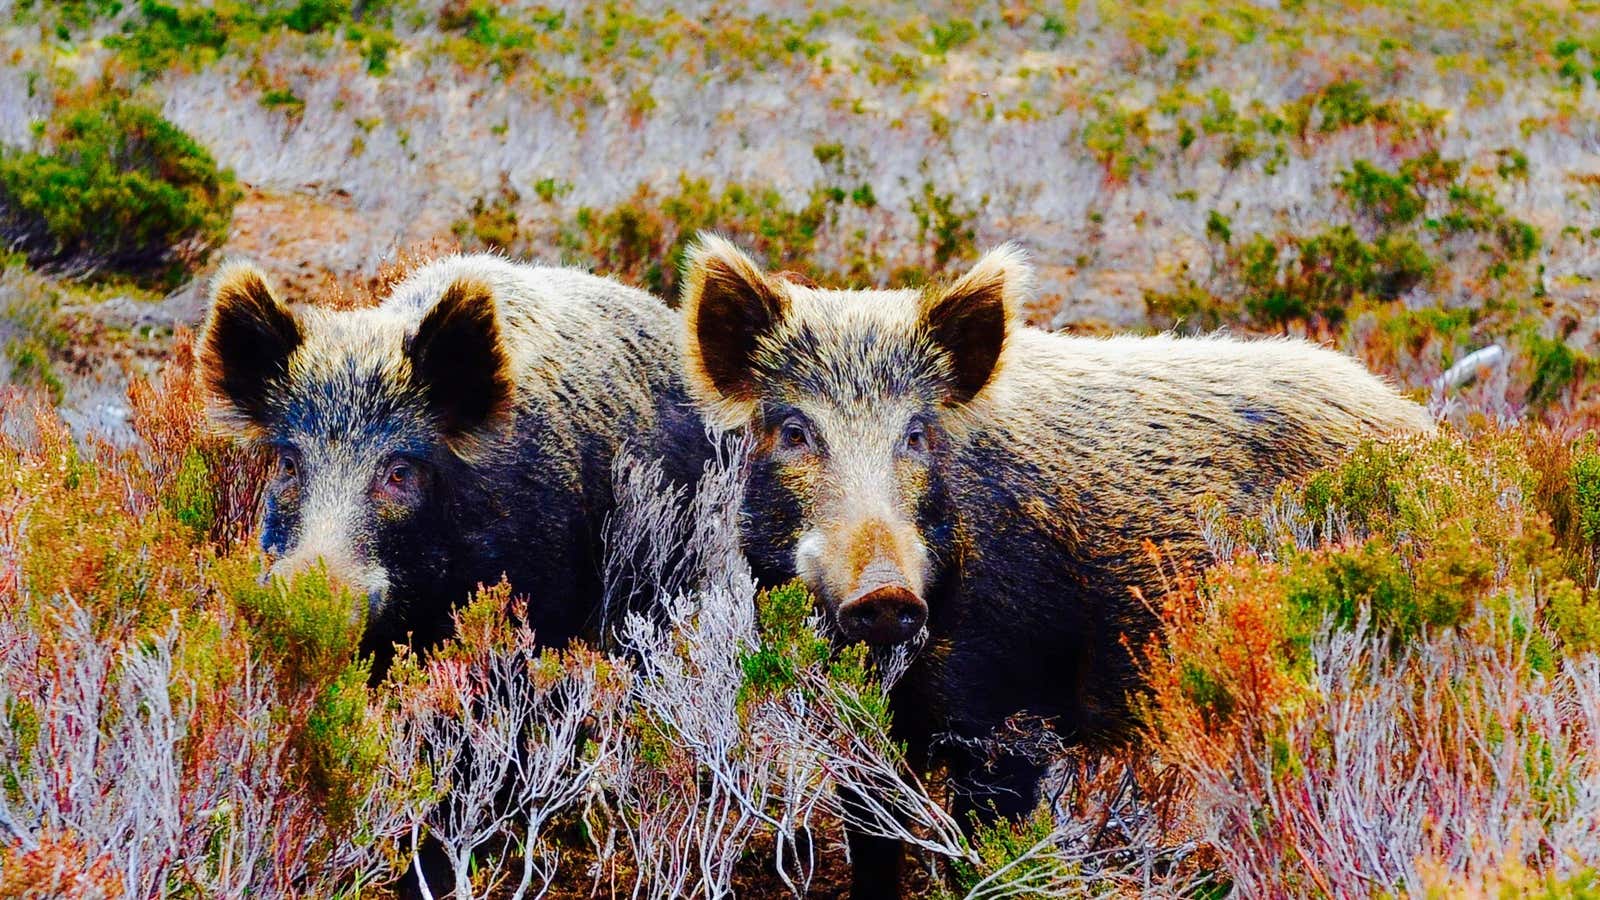 No one told the wild boars about poisonous fruit and funguses.